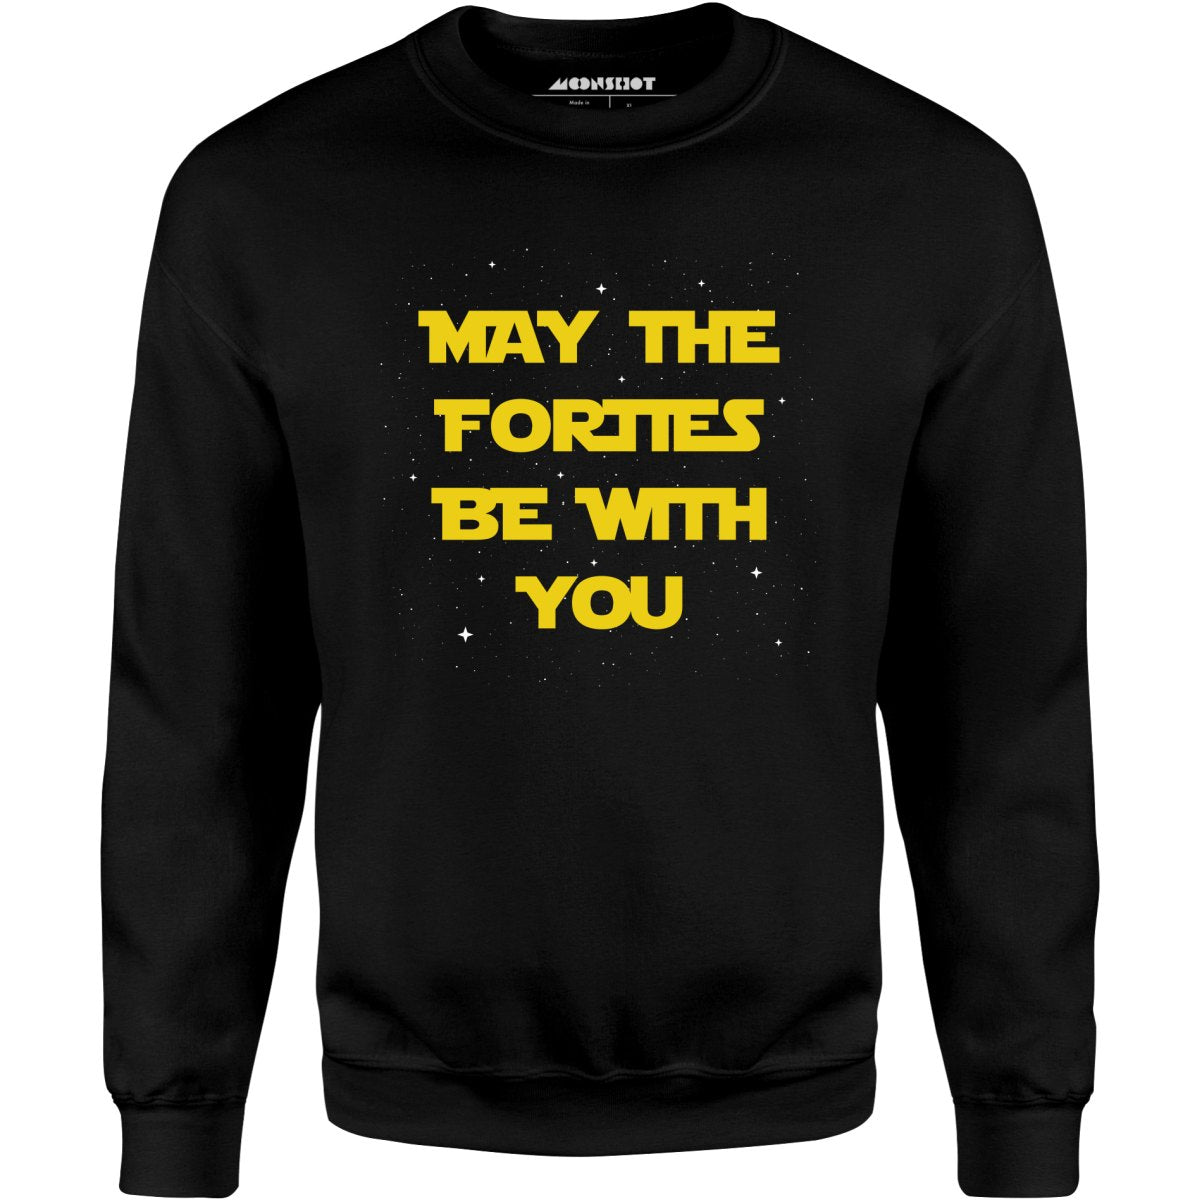 May The Forties Be With You - Unisex Sweatshirt